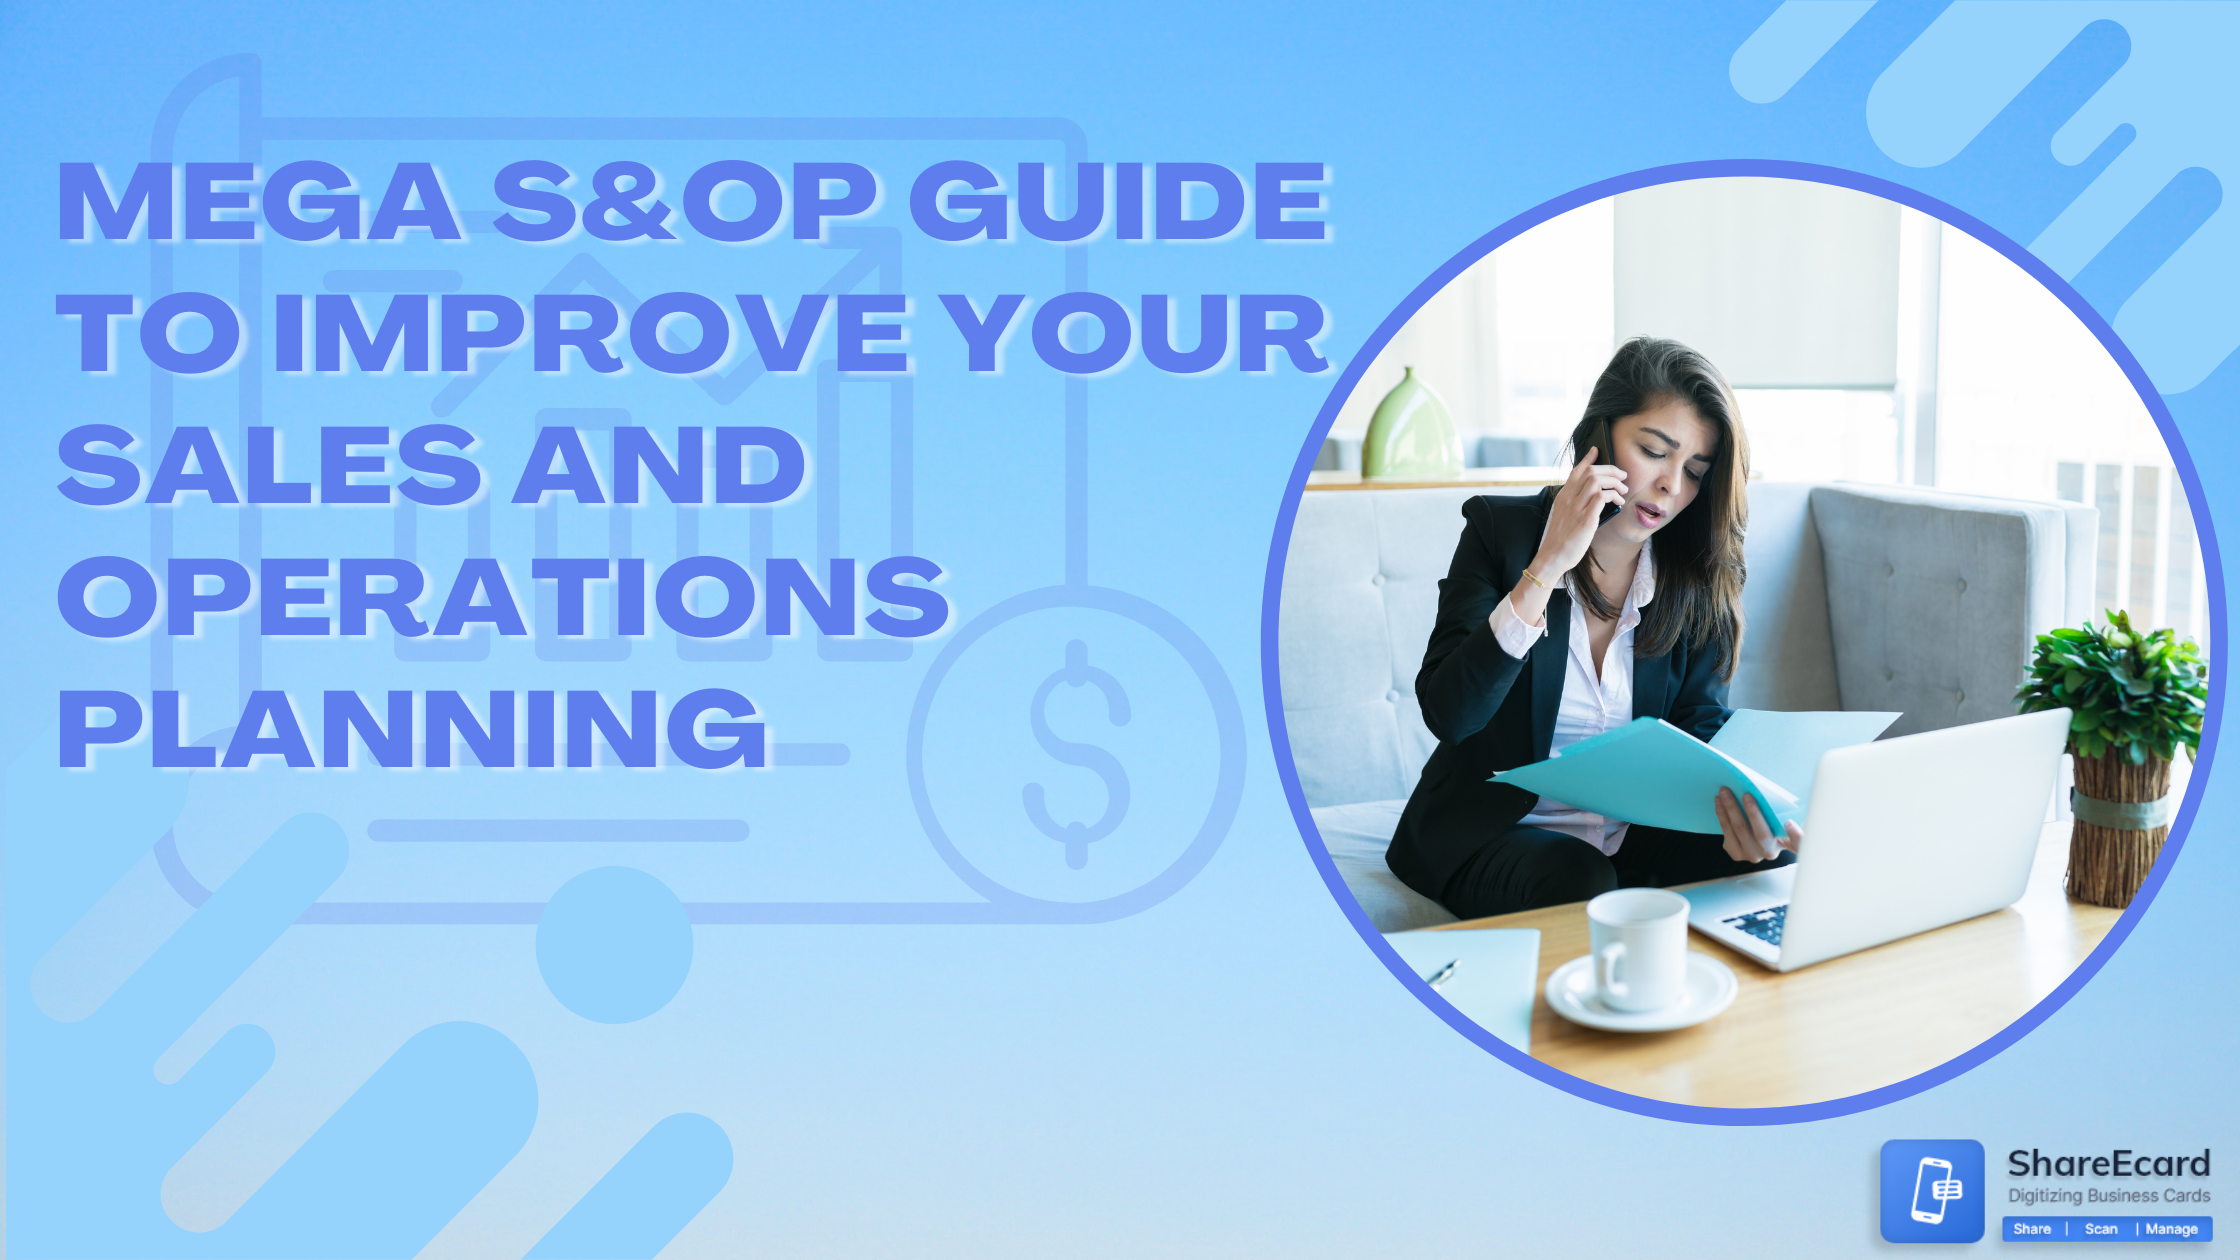 Mega S&OP Guide to Improve Your Sales and Operations Planning